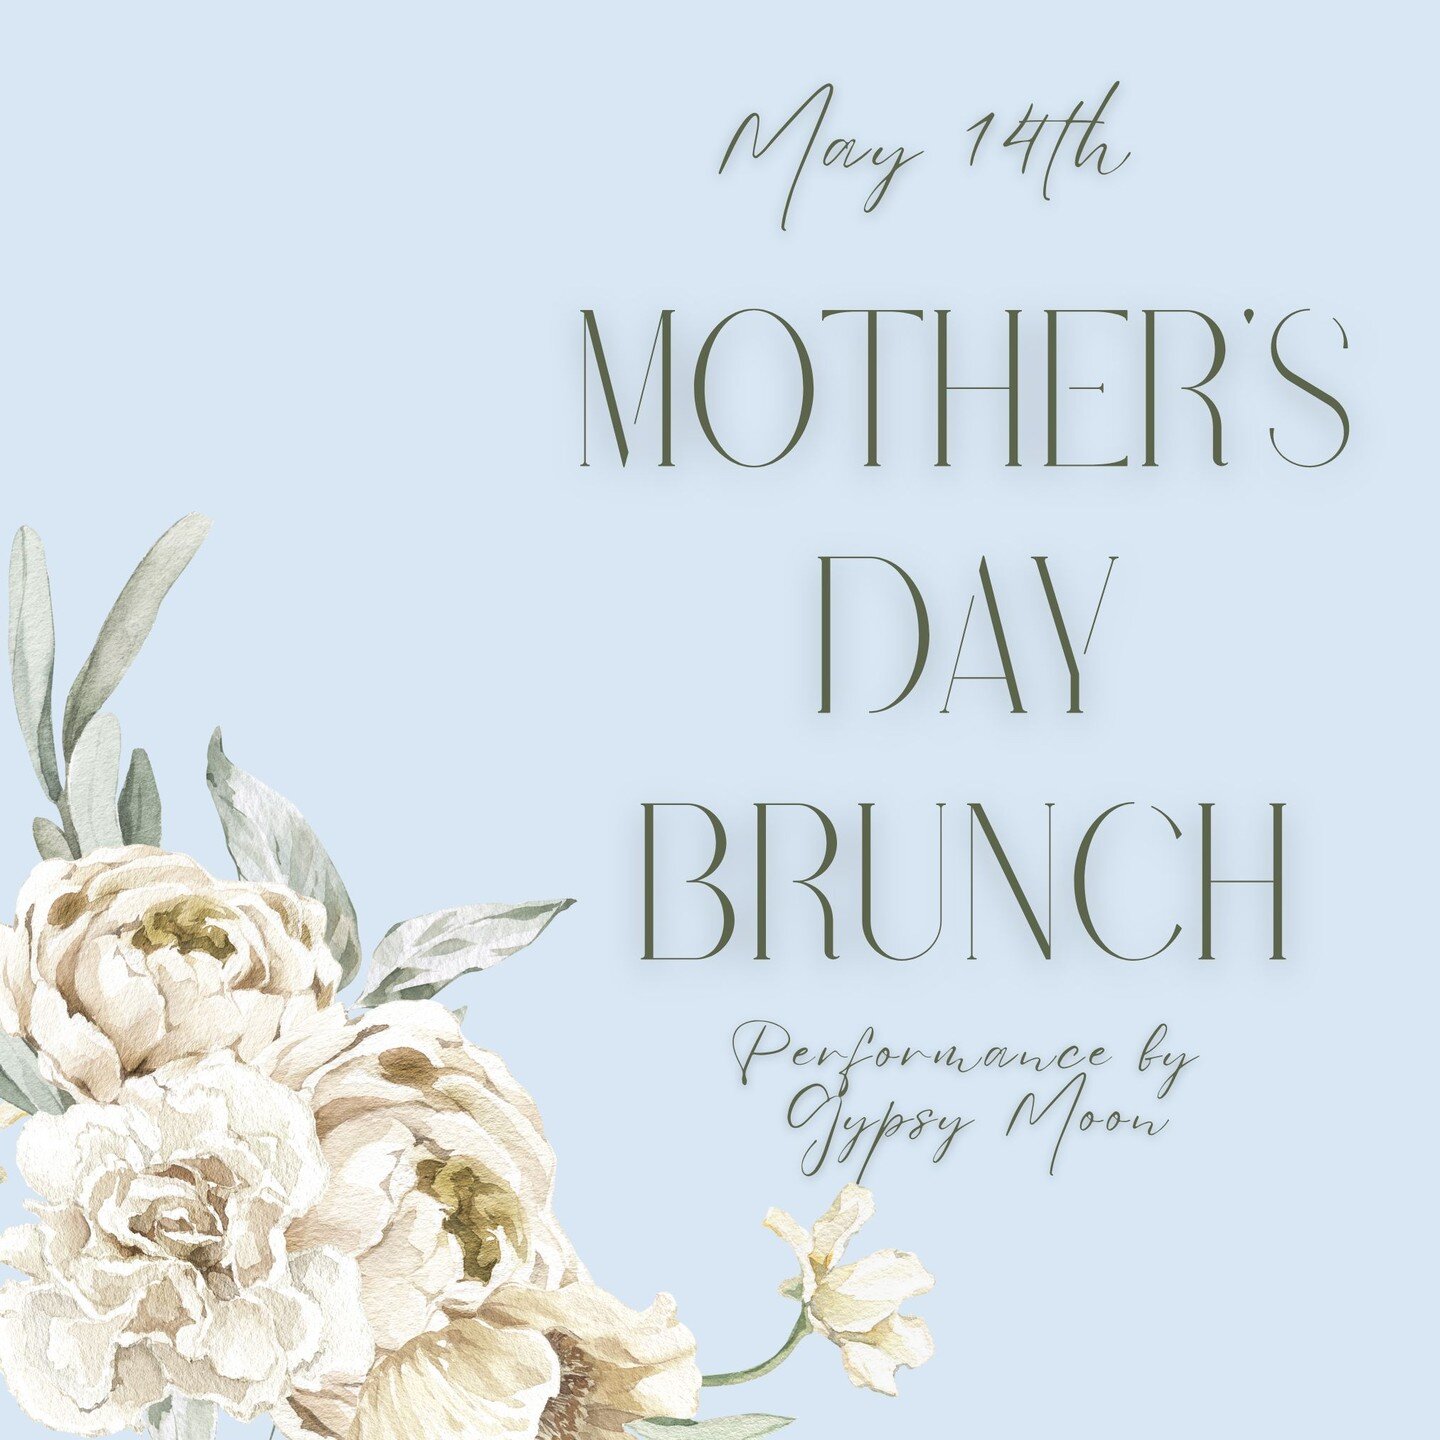 The Annual Mother's Day Brunch at Engelmann Cellars is right around the corner! 🤍✨
This year's brunch will featuring a fabulous 7 station buffet by A Thumbs Up Catering, live music by Gypsy Moon, vendor market with gifts for Mom, and plenty of mimos